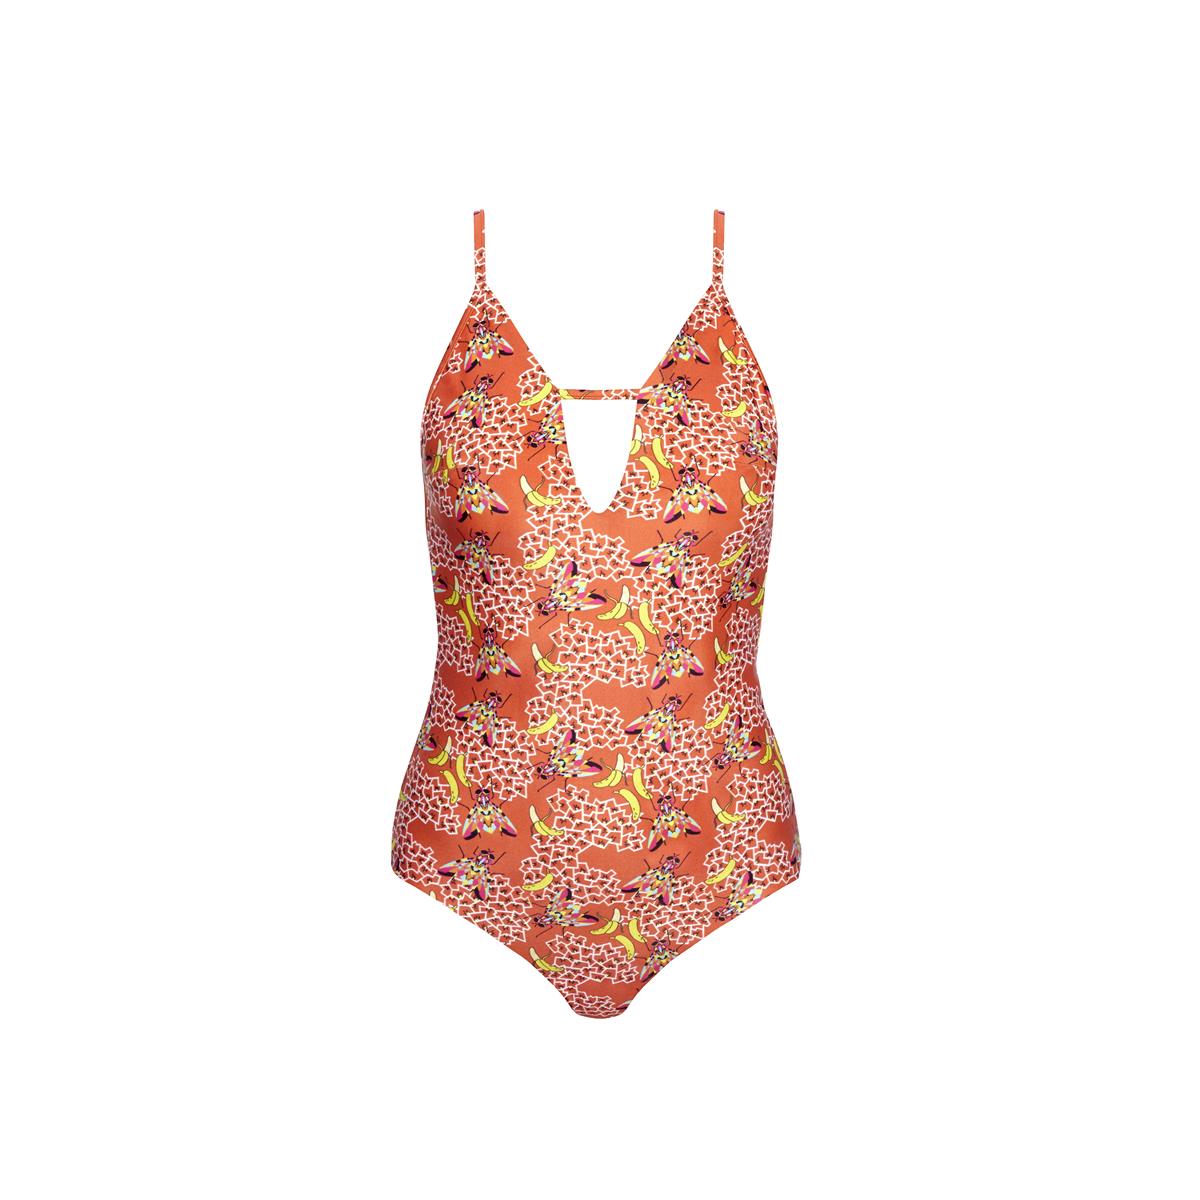 MARGARET AND HERMIONE_SS17_BANANA POP_Swimsuit2_EUR 189_banana